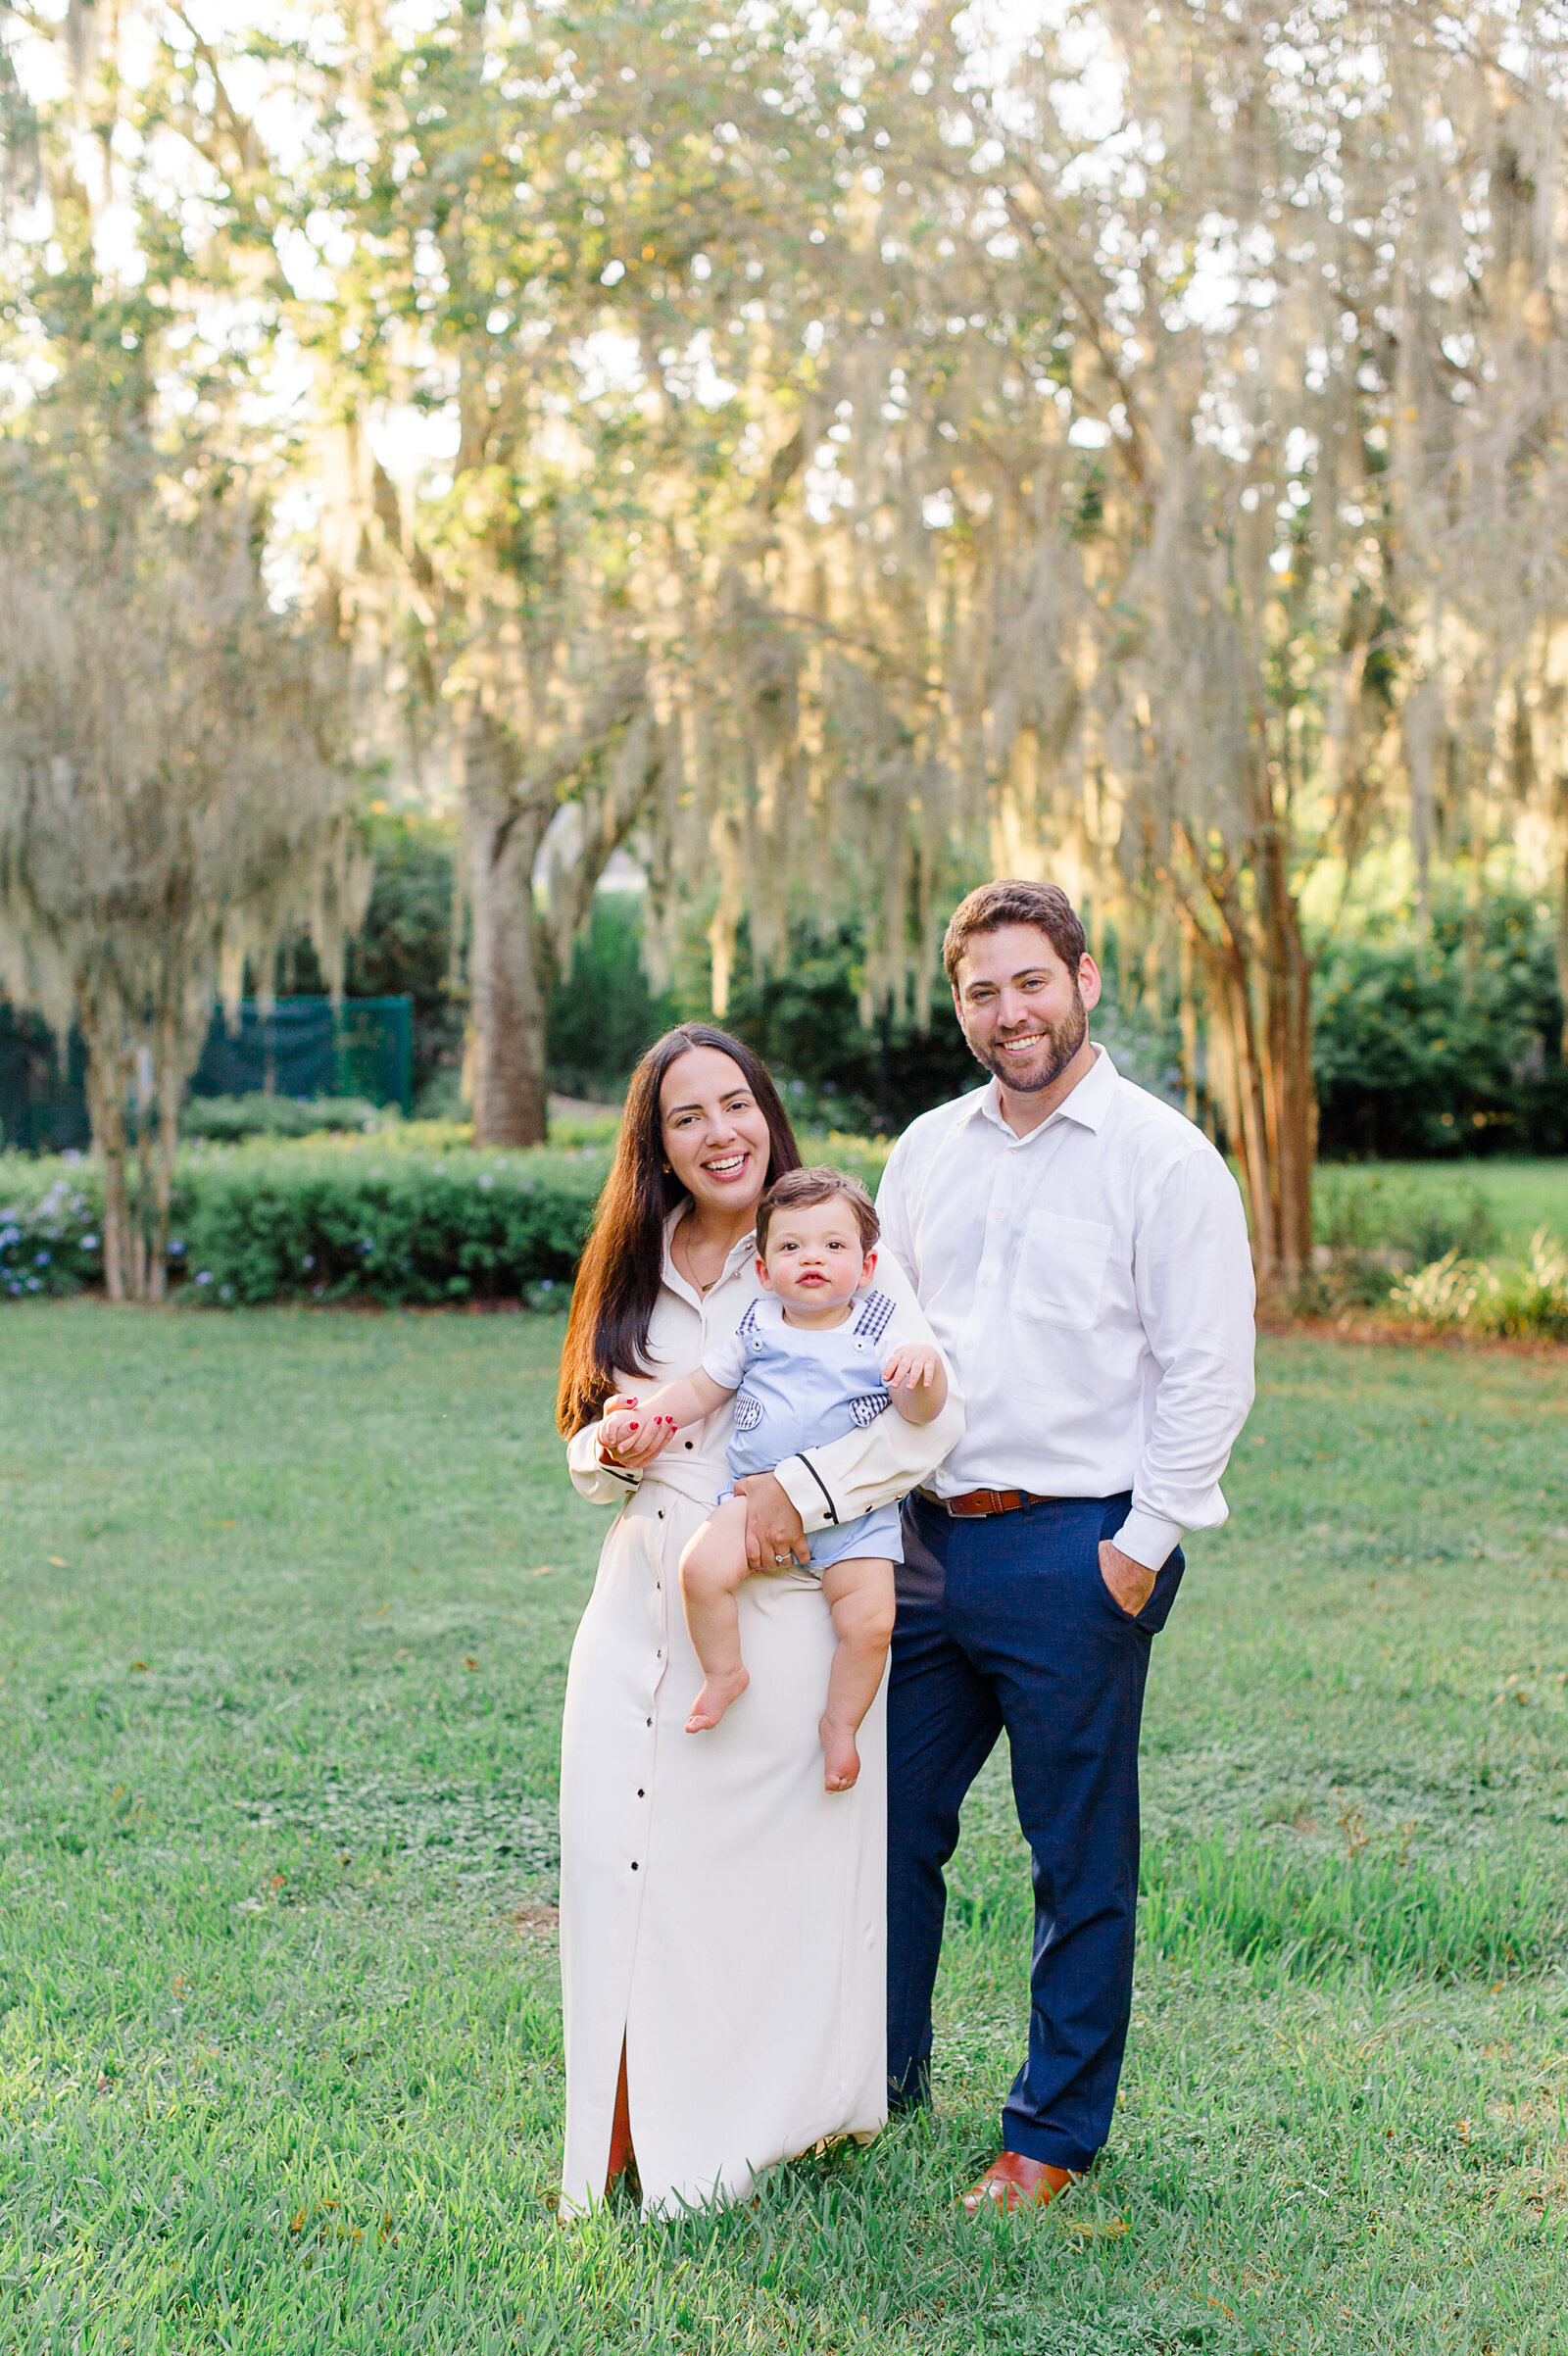 Winter Park family photographer captures a beautiful portrait of a family of three smiling at the camera